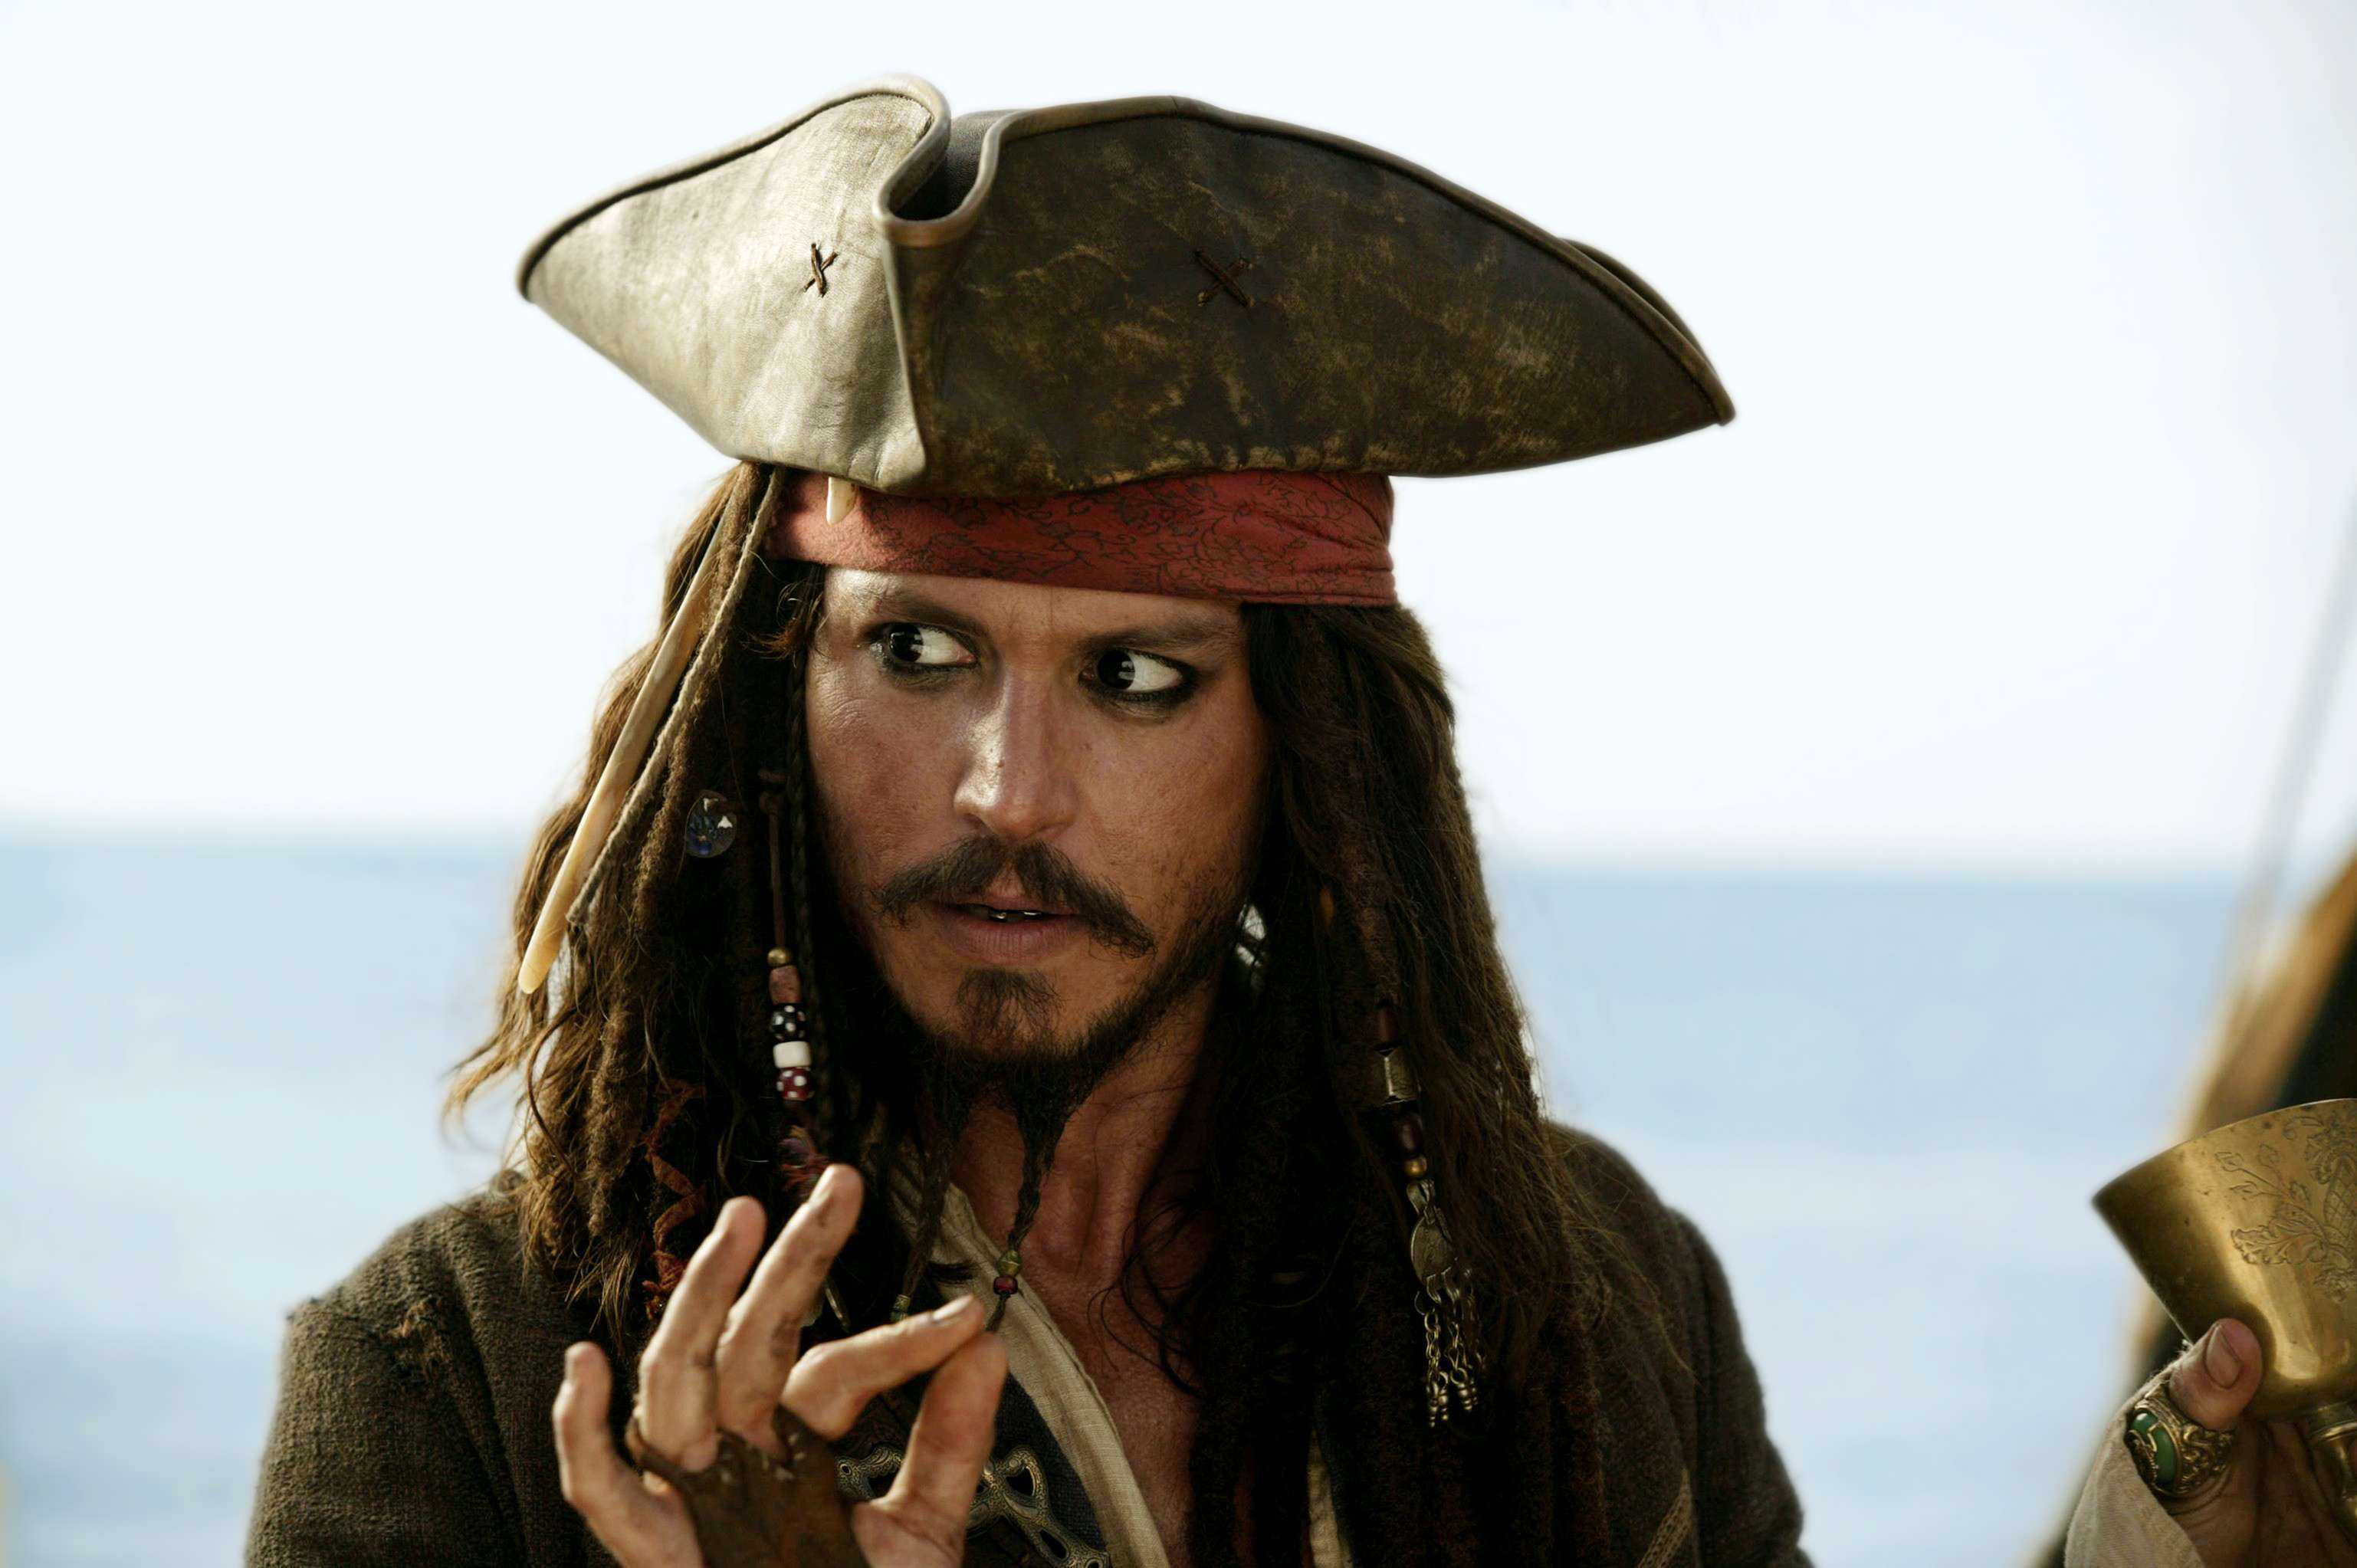 jack sparrow, pirates of the caribbean, movie, pirates of the caribbean: dead man's chest, johnny depp, pirate